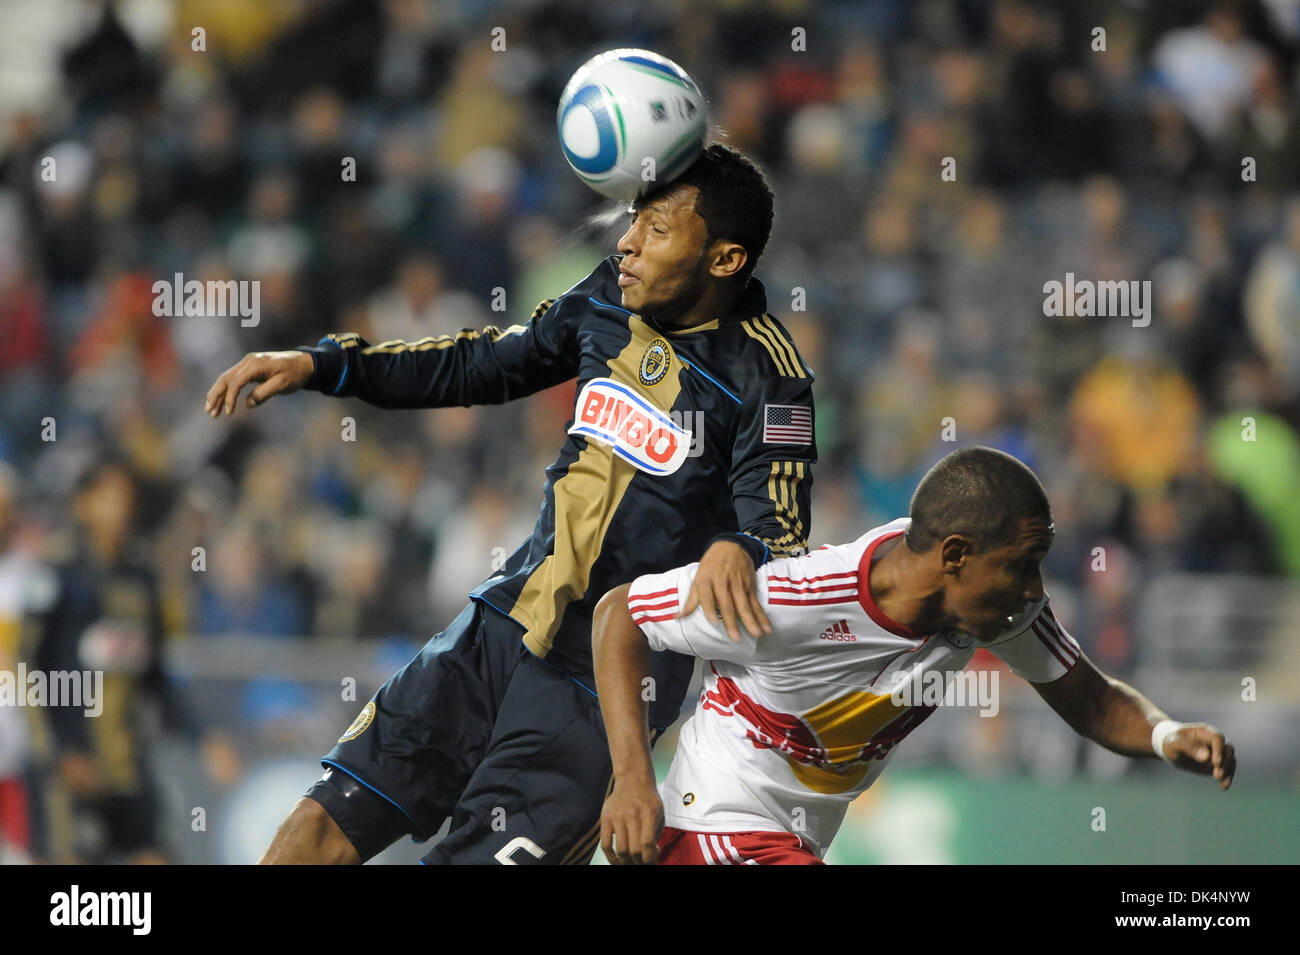 Apr. 9, 2011 - Chester, Pennsylvania, U.S. - Philadephia Union defender CARLOS VALDEZ (5) heads the ball over New York Red Bulls forward JUAN AGUDELO (17). At the half the New York Red Bulls and the Philadelphia Union are tied 0-0 in a game being played at PPL Park. (Credit Image: © Mike McAtee/Southcreek Global/ZUMAPRESS.com) Stock Photo